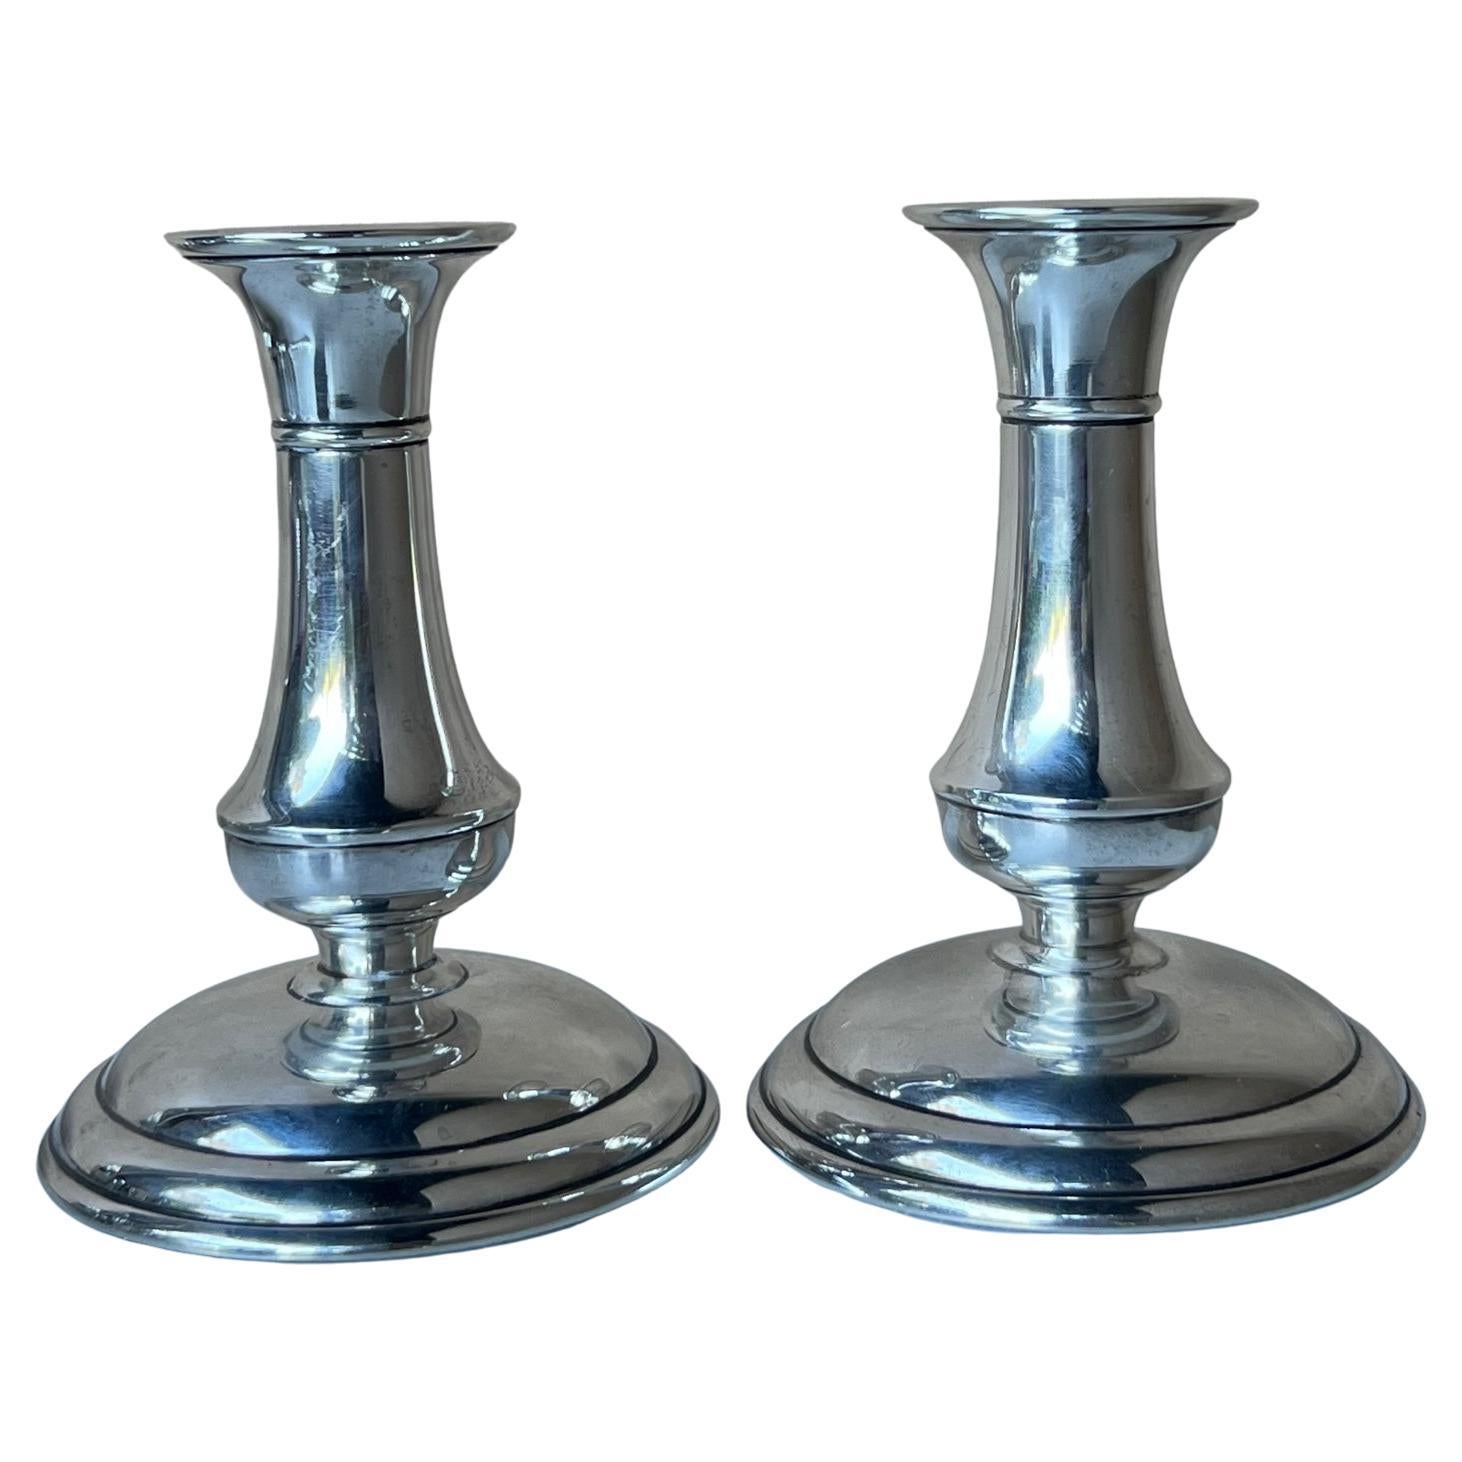 Sterling Silver Candlesticks by Richard Dimes, Set of 2, C. 1910s